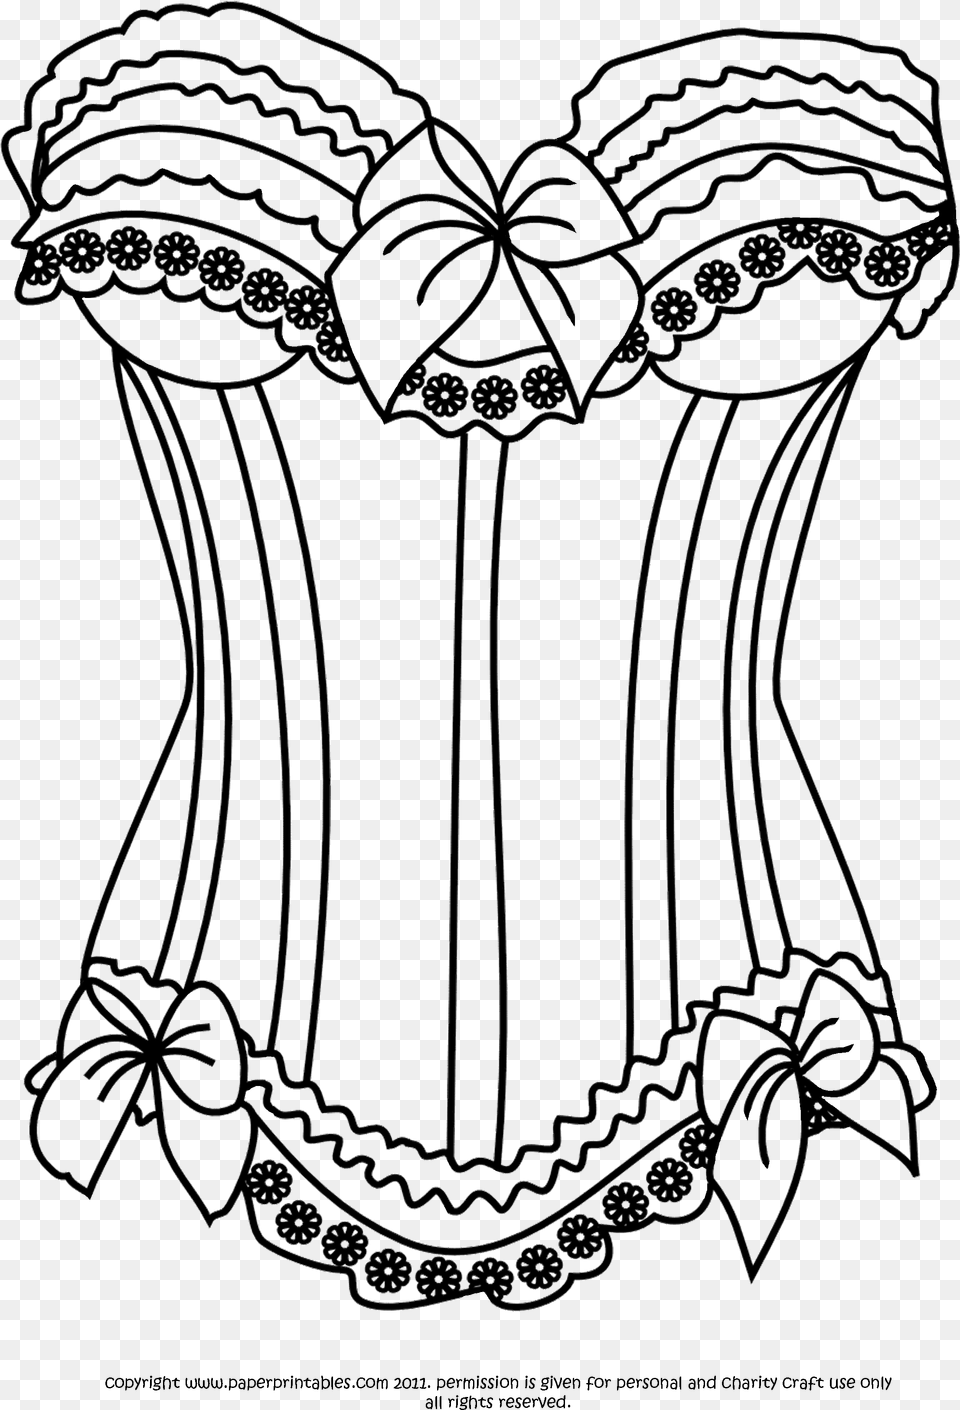 Backing Paper For This Is In Backing Papers Corset Coloring Page, Clothing, Chandelier, Lamp Free Transparent Png